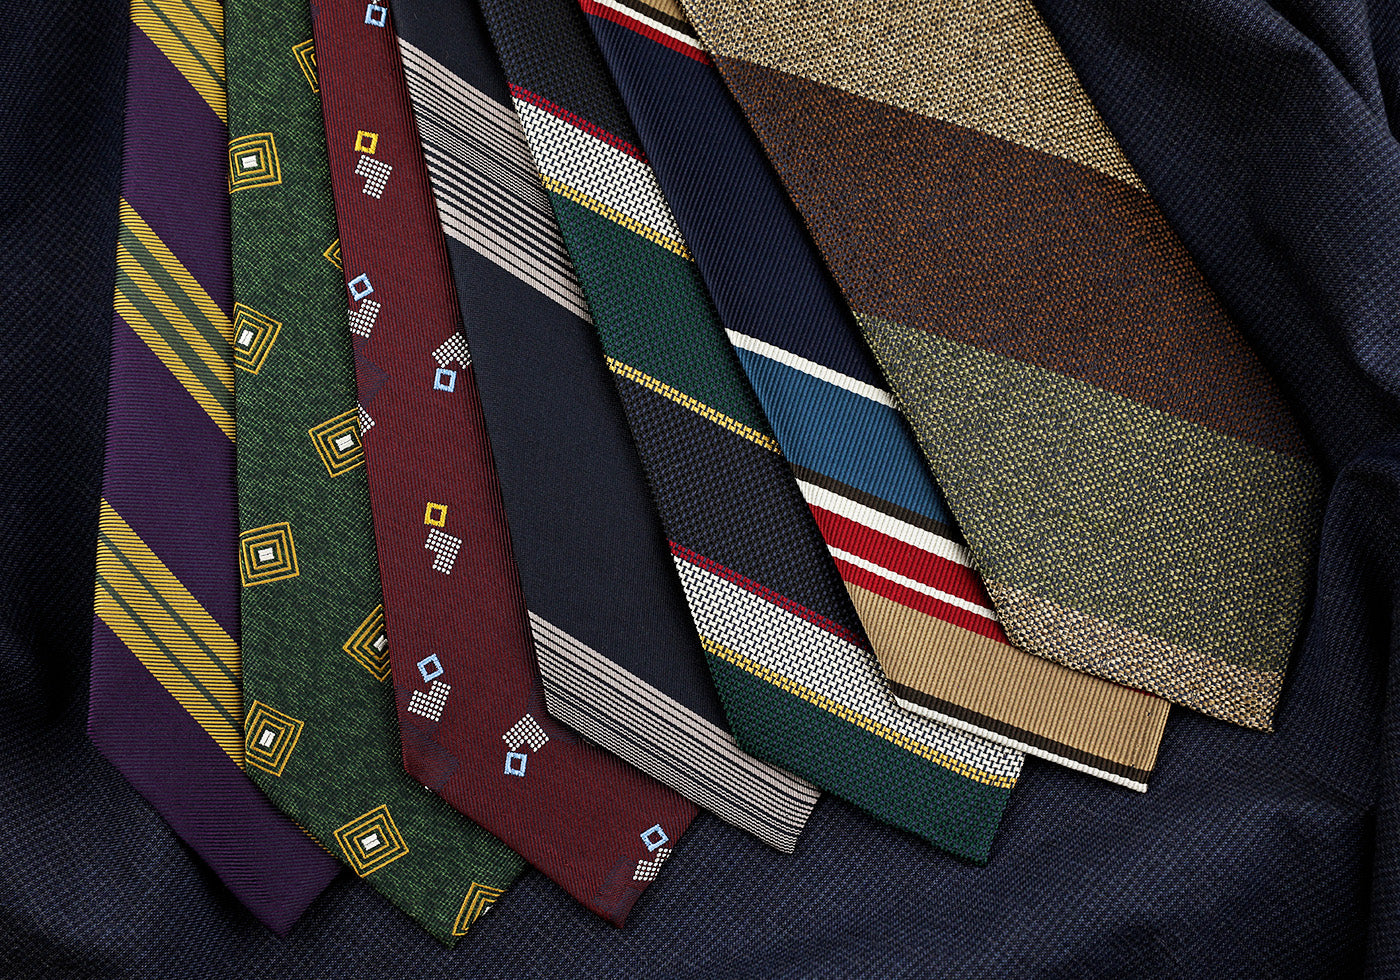 Woven ties - grenadine, repp stripes and more